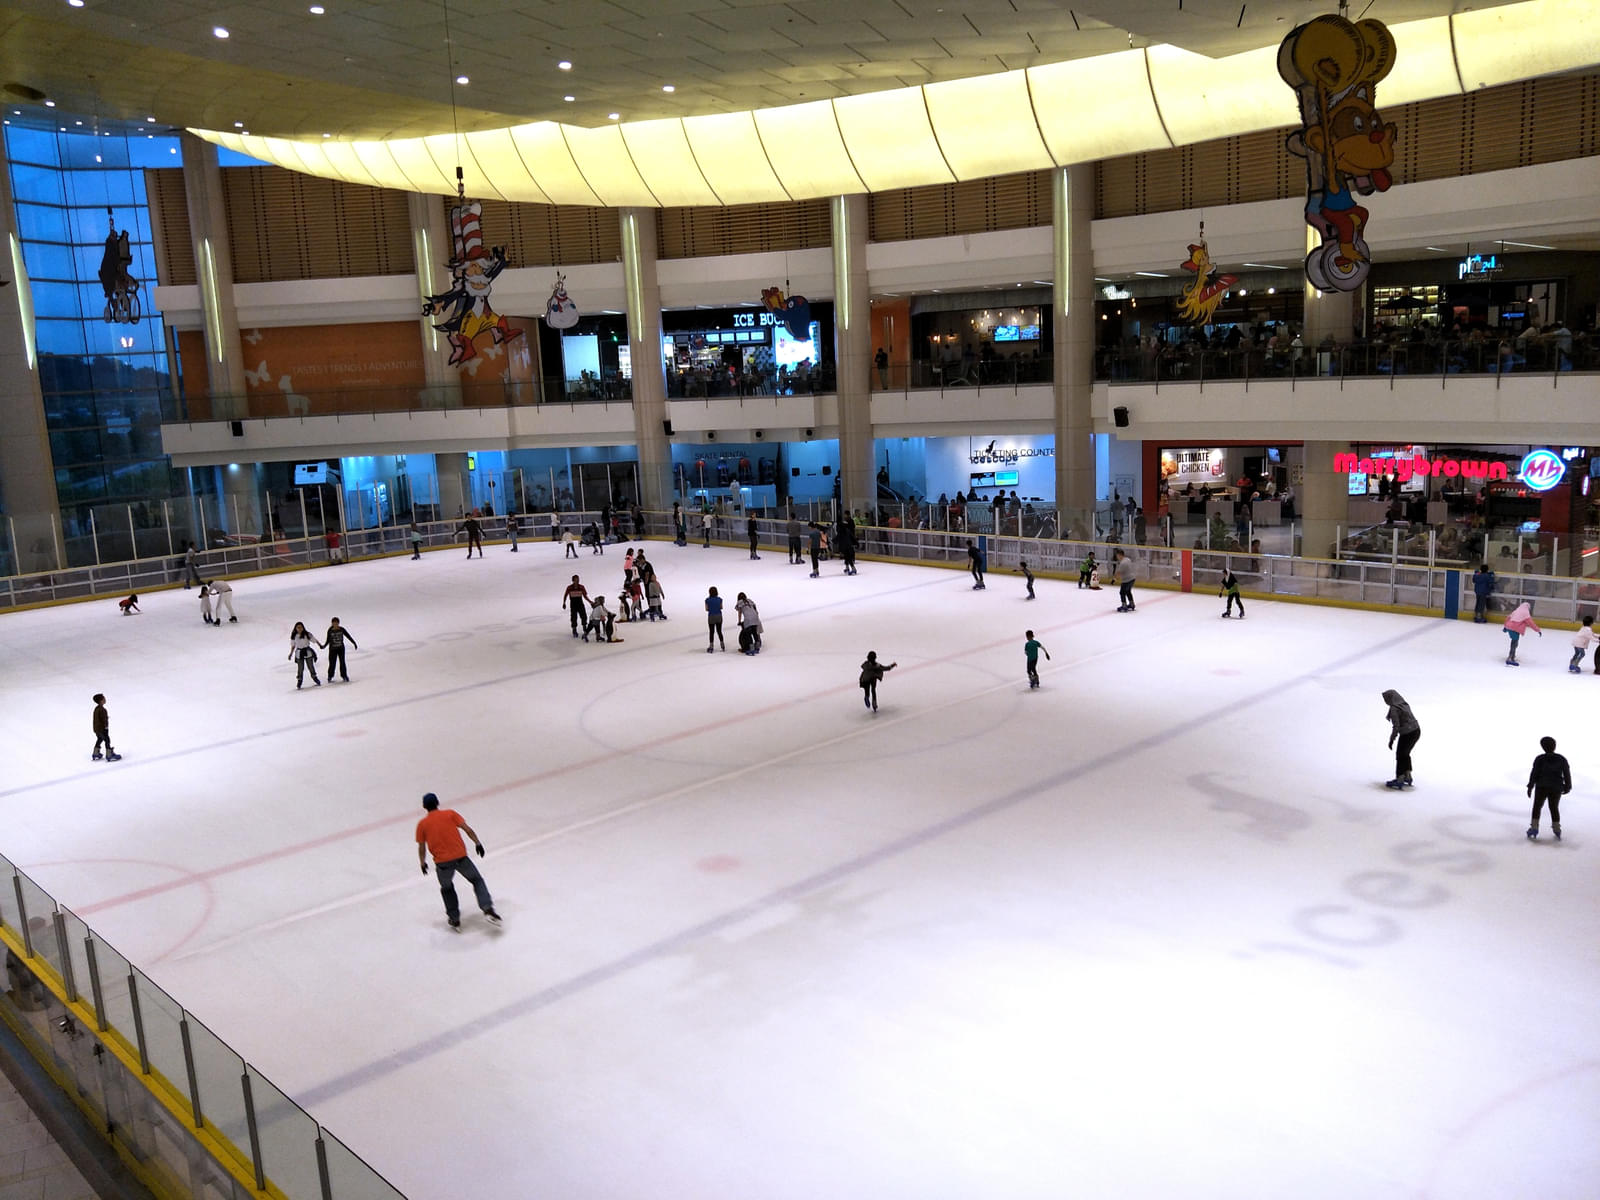 Embrace the Thrills of Gliding on Ice at Malaysia's Largest Ice Skating Rink